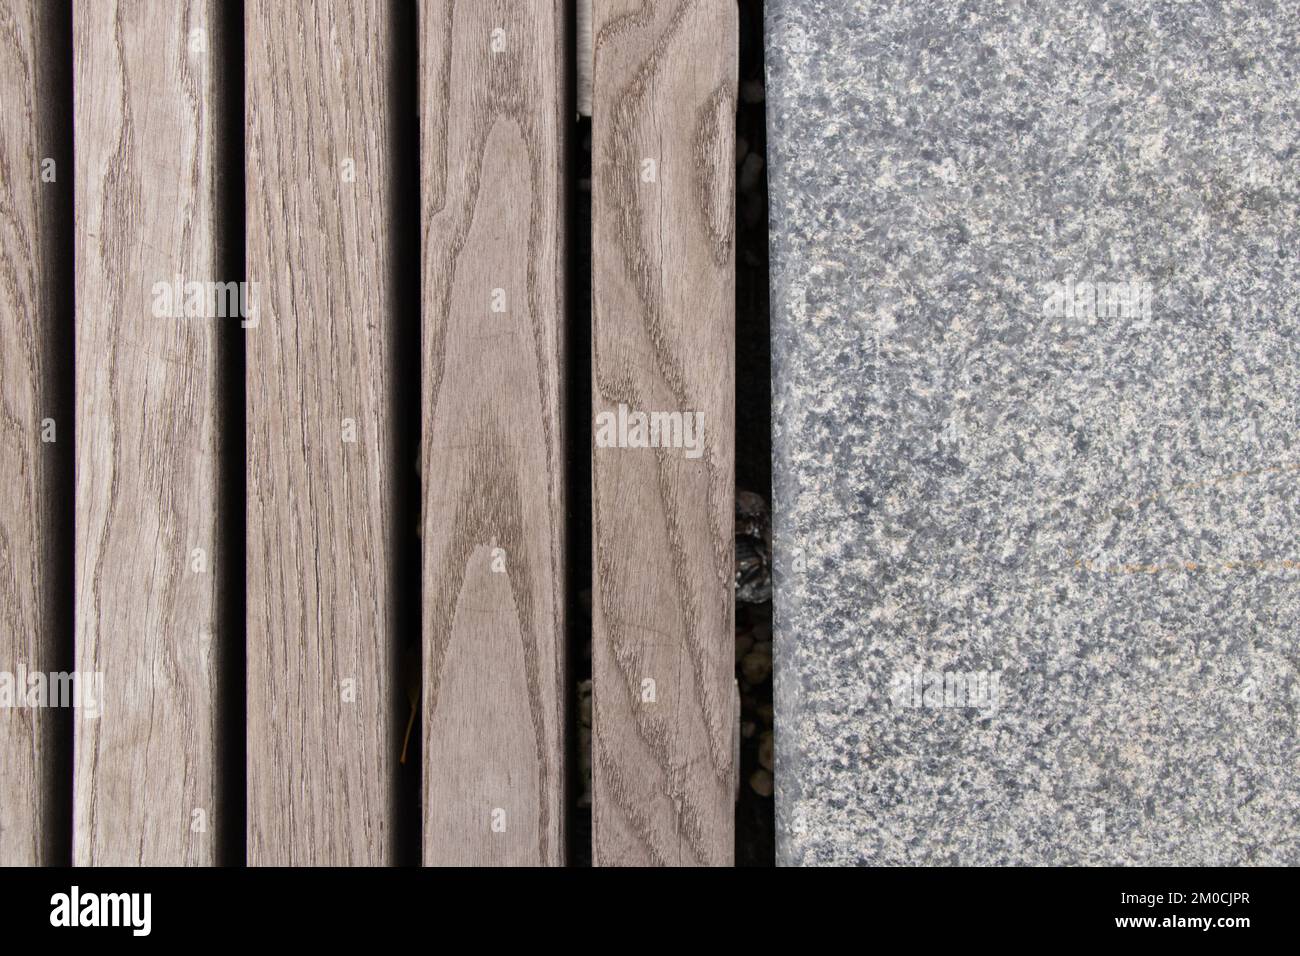 Wooden boards and concrete stone as background, outdoor bench as background Stock Photo